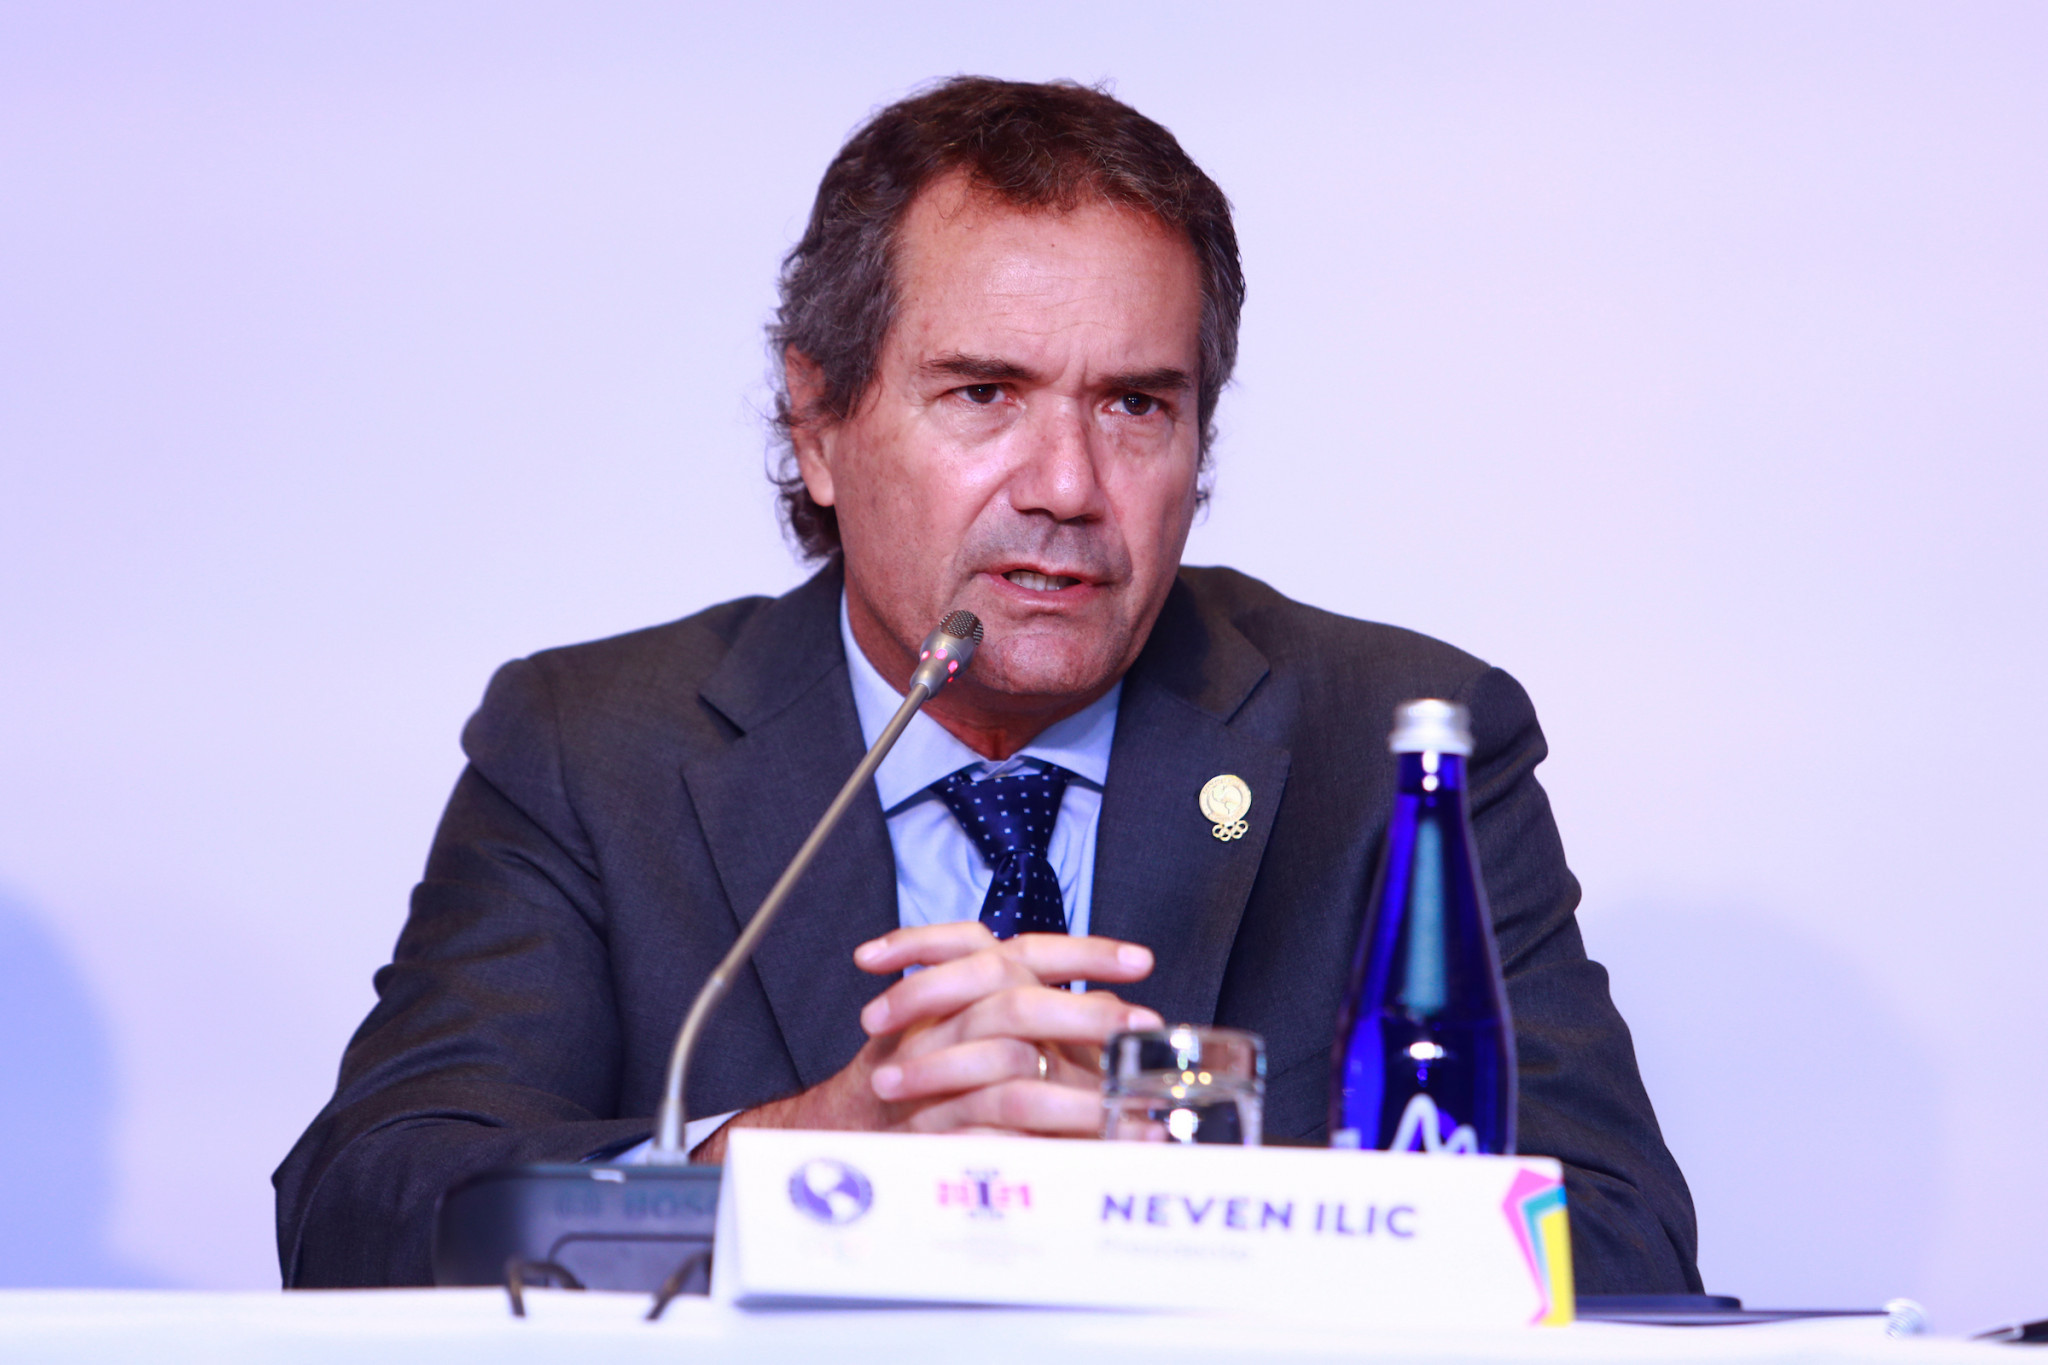 Panam Sports President Neven Ilic admitted that hosting the Junior Pan American Games was a 